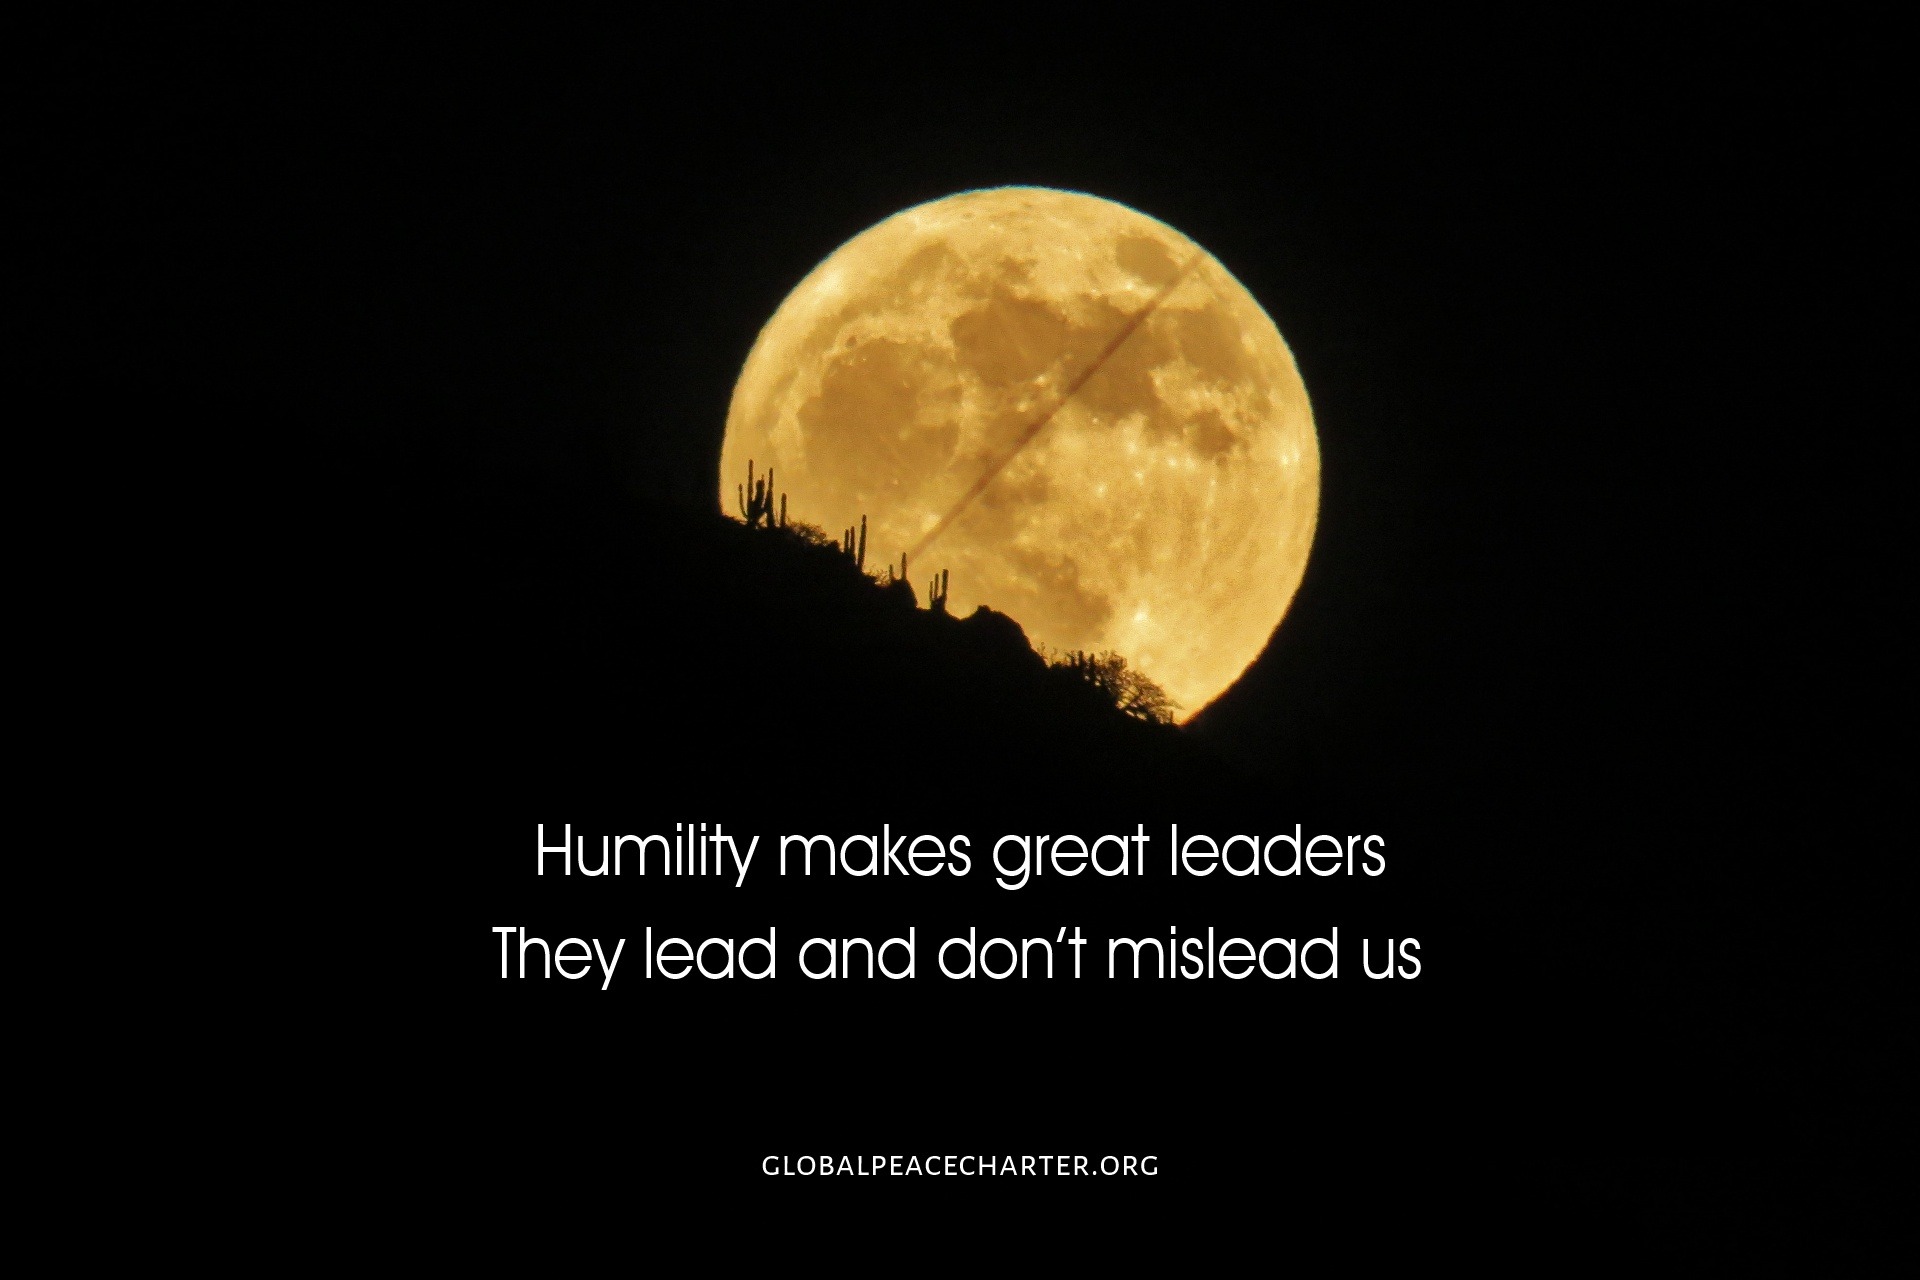 Leaders in humility